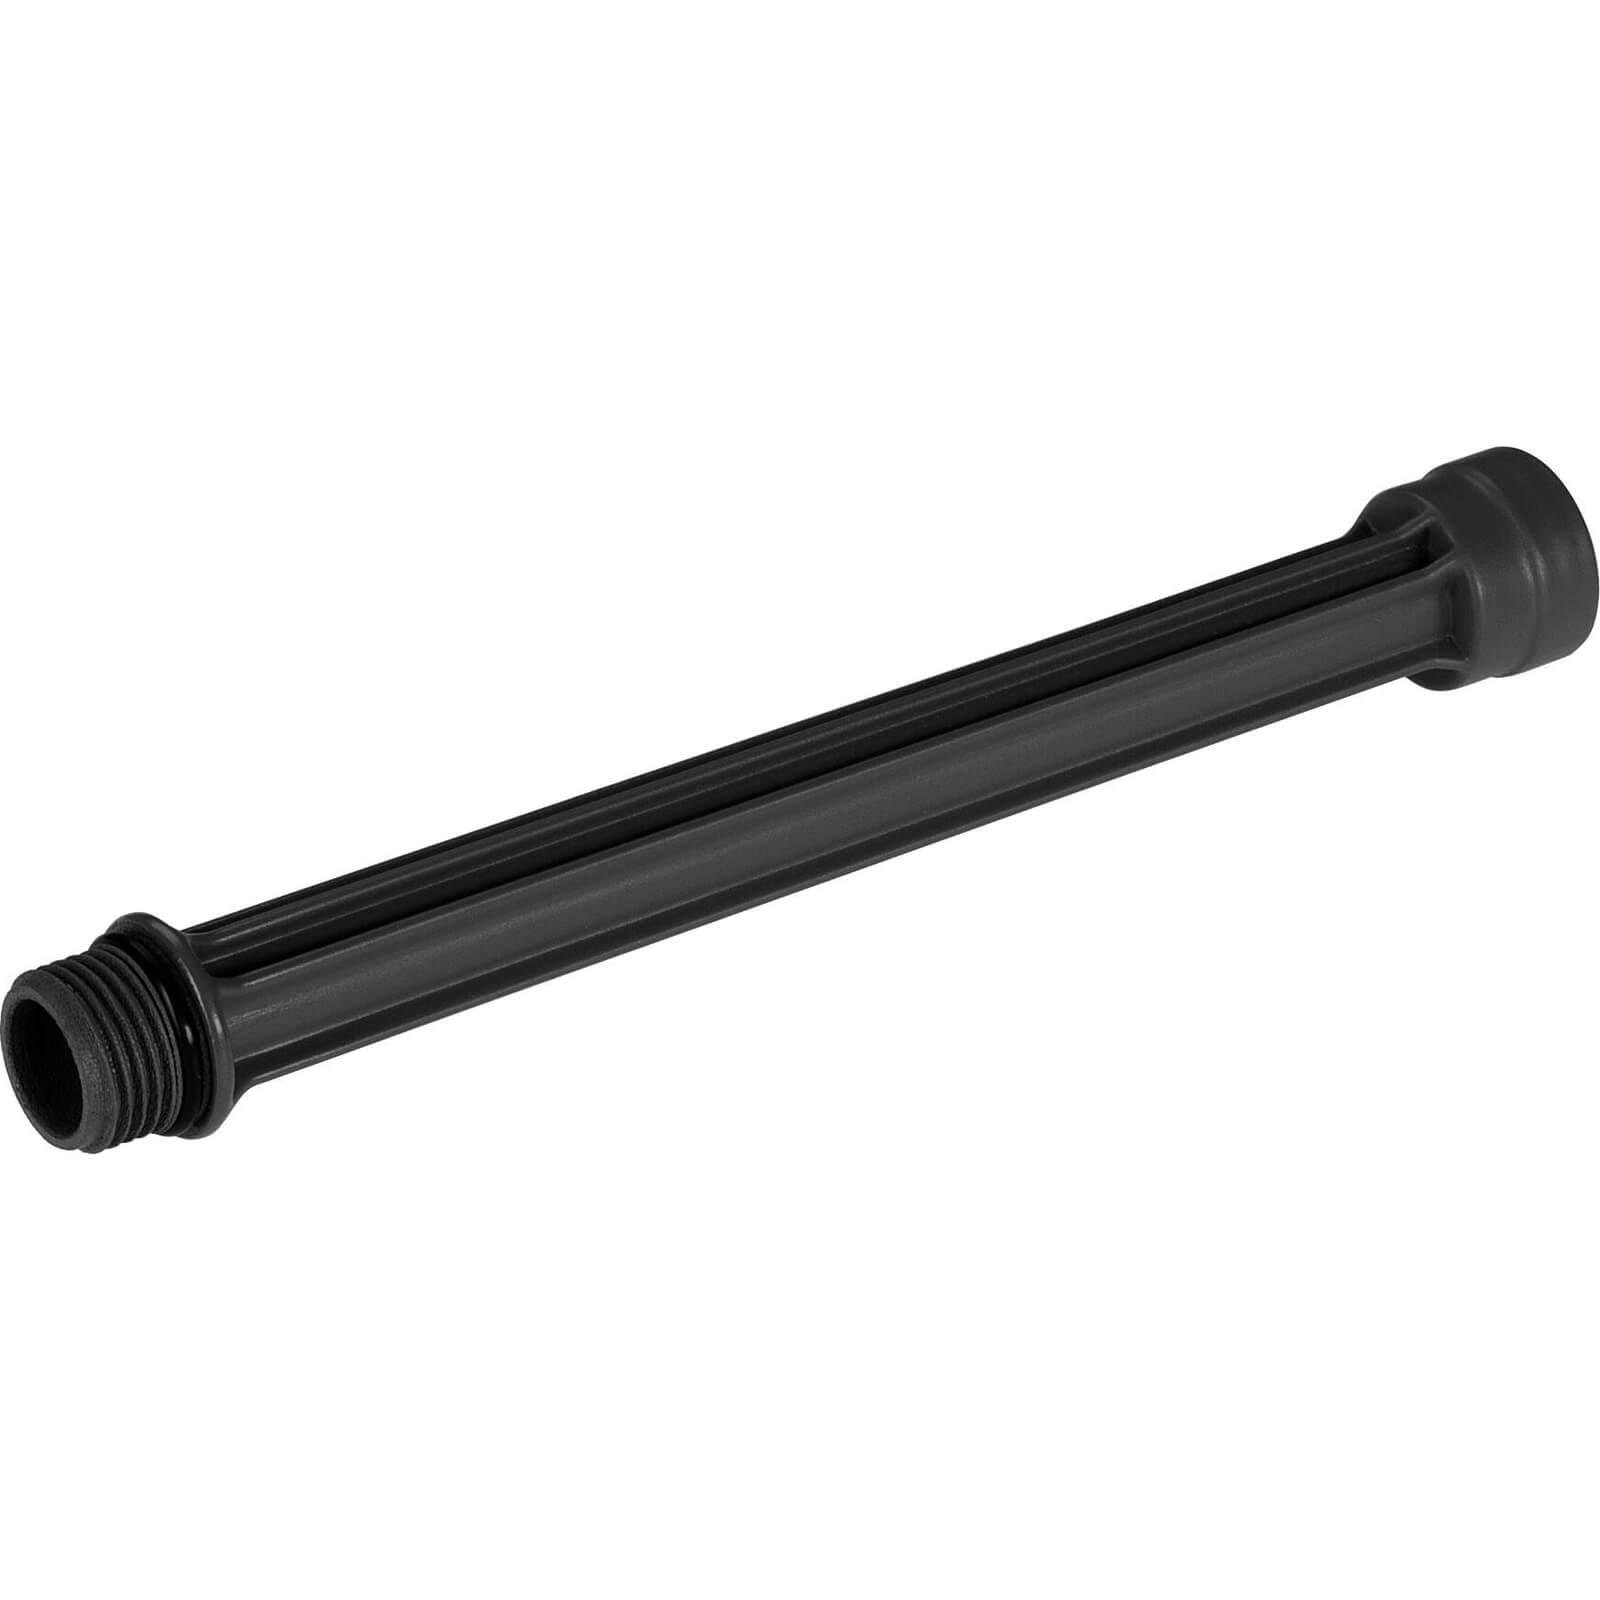 Image of Gardena MICRO DRIP Extension Pipe for OS 90 Oscillating Sprinkler (New)